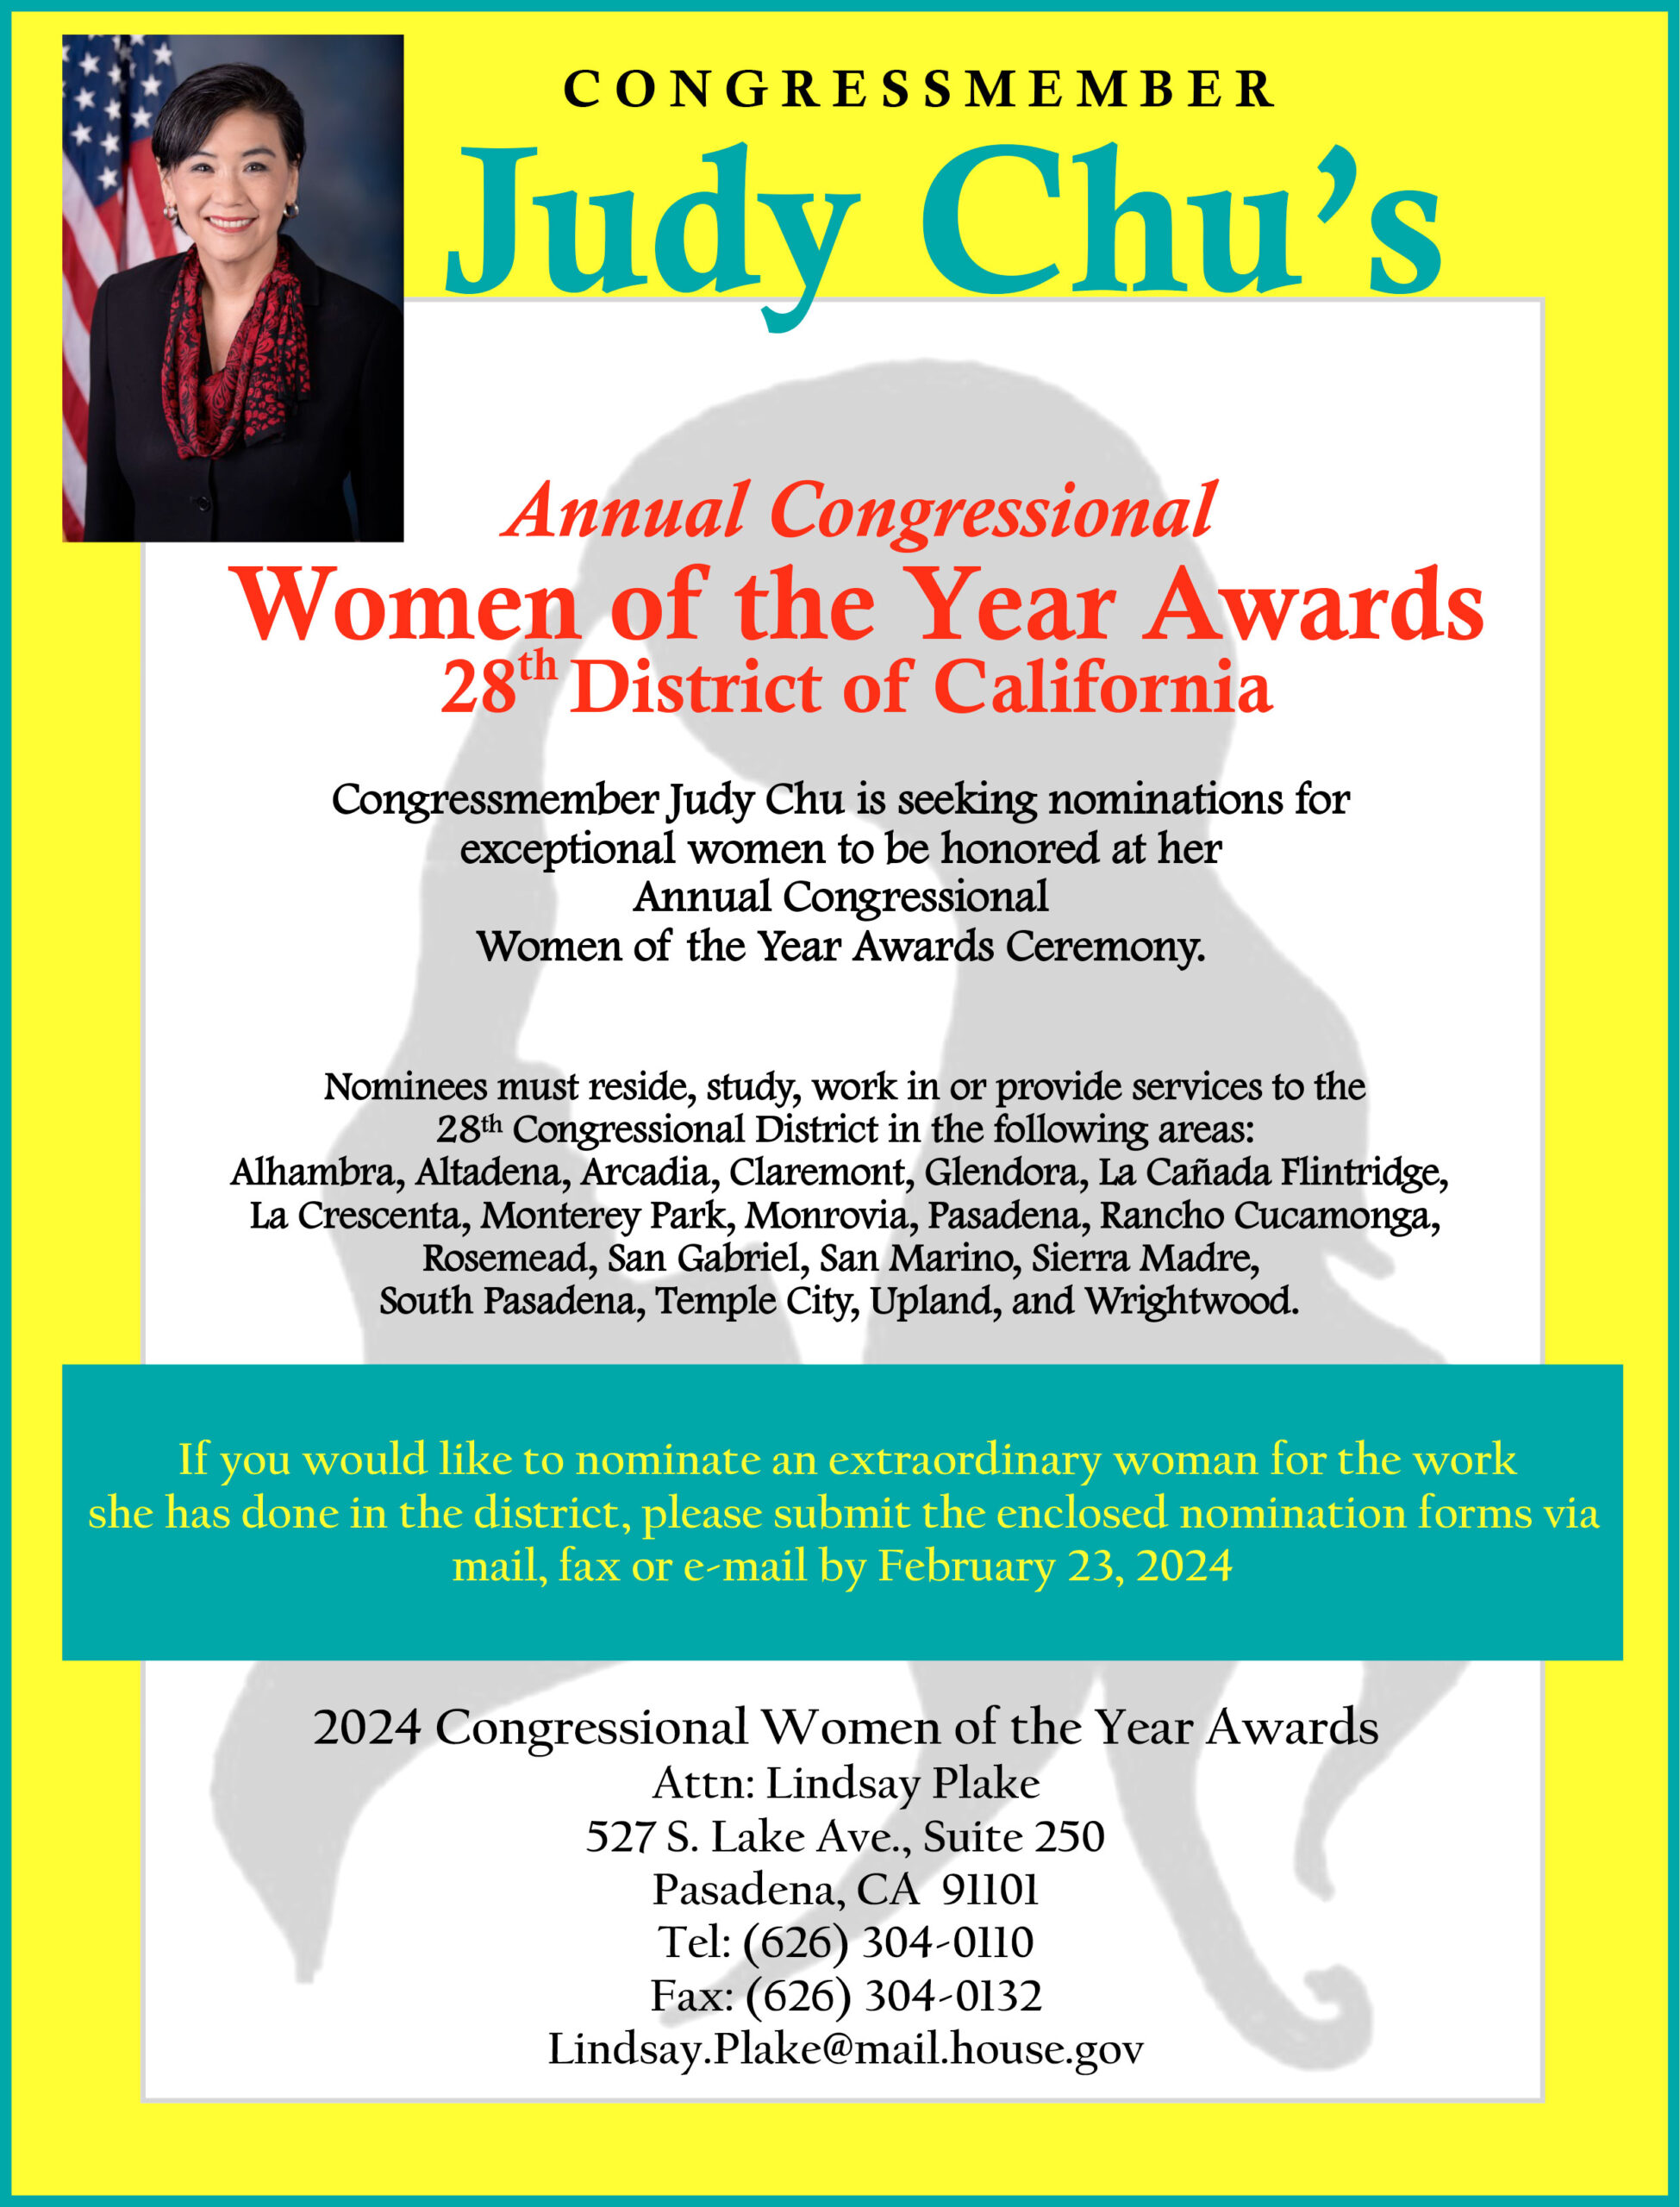 Congresswoman Judy Chu Women of the Year Awards nomination form for 2024